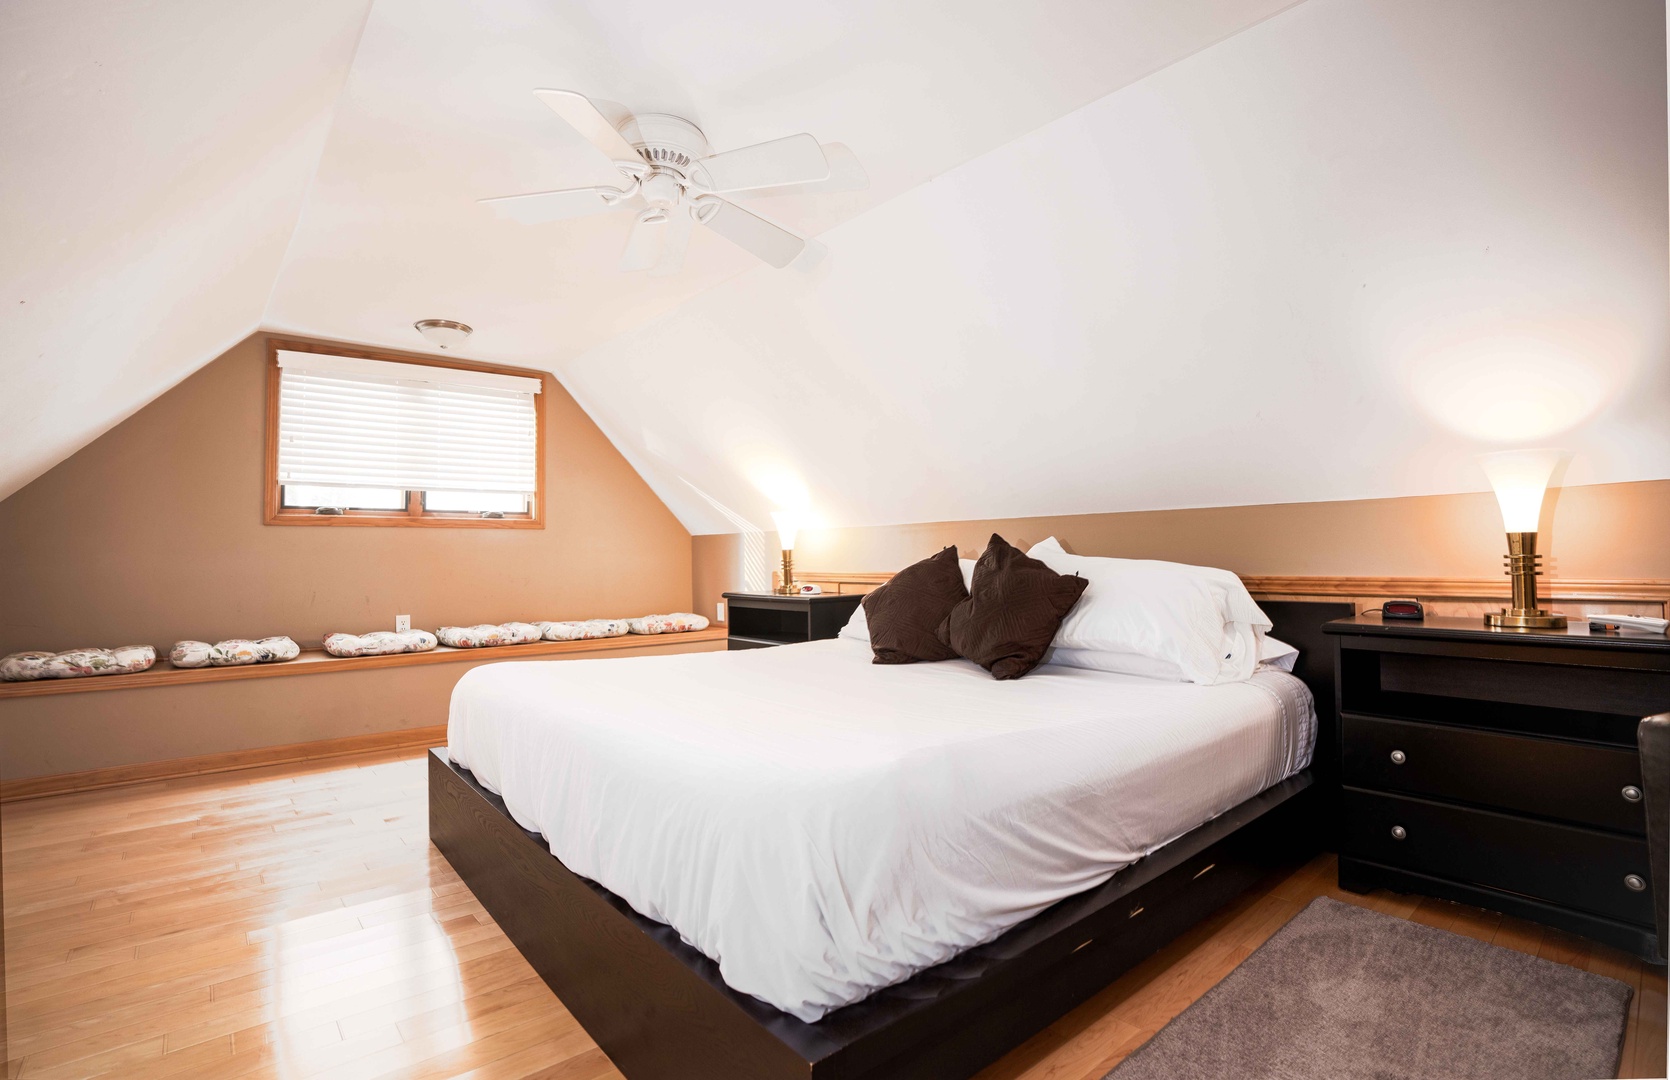 The guest house bedroom features a luxurious king bed & ceiling fan